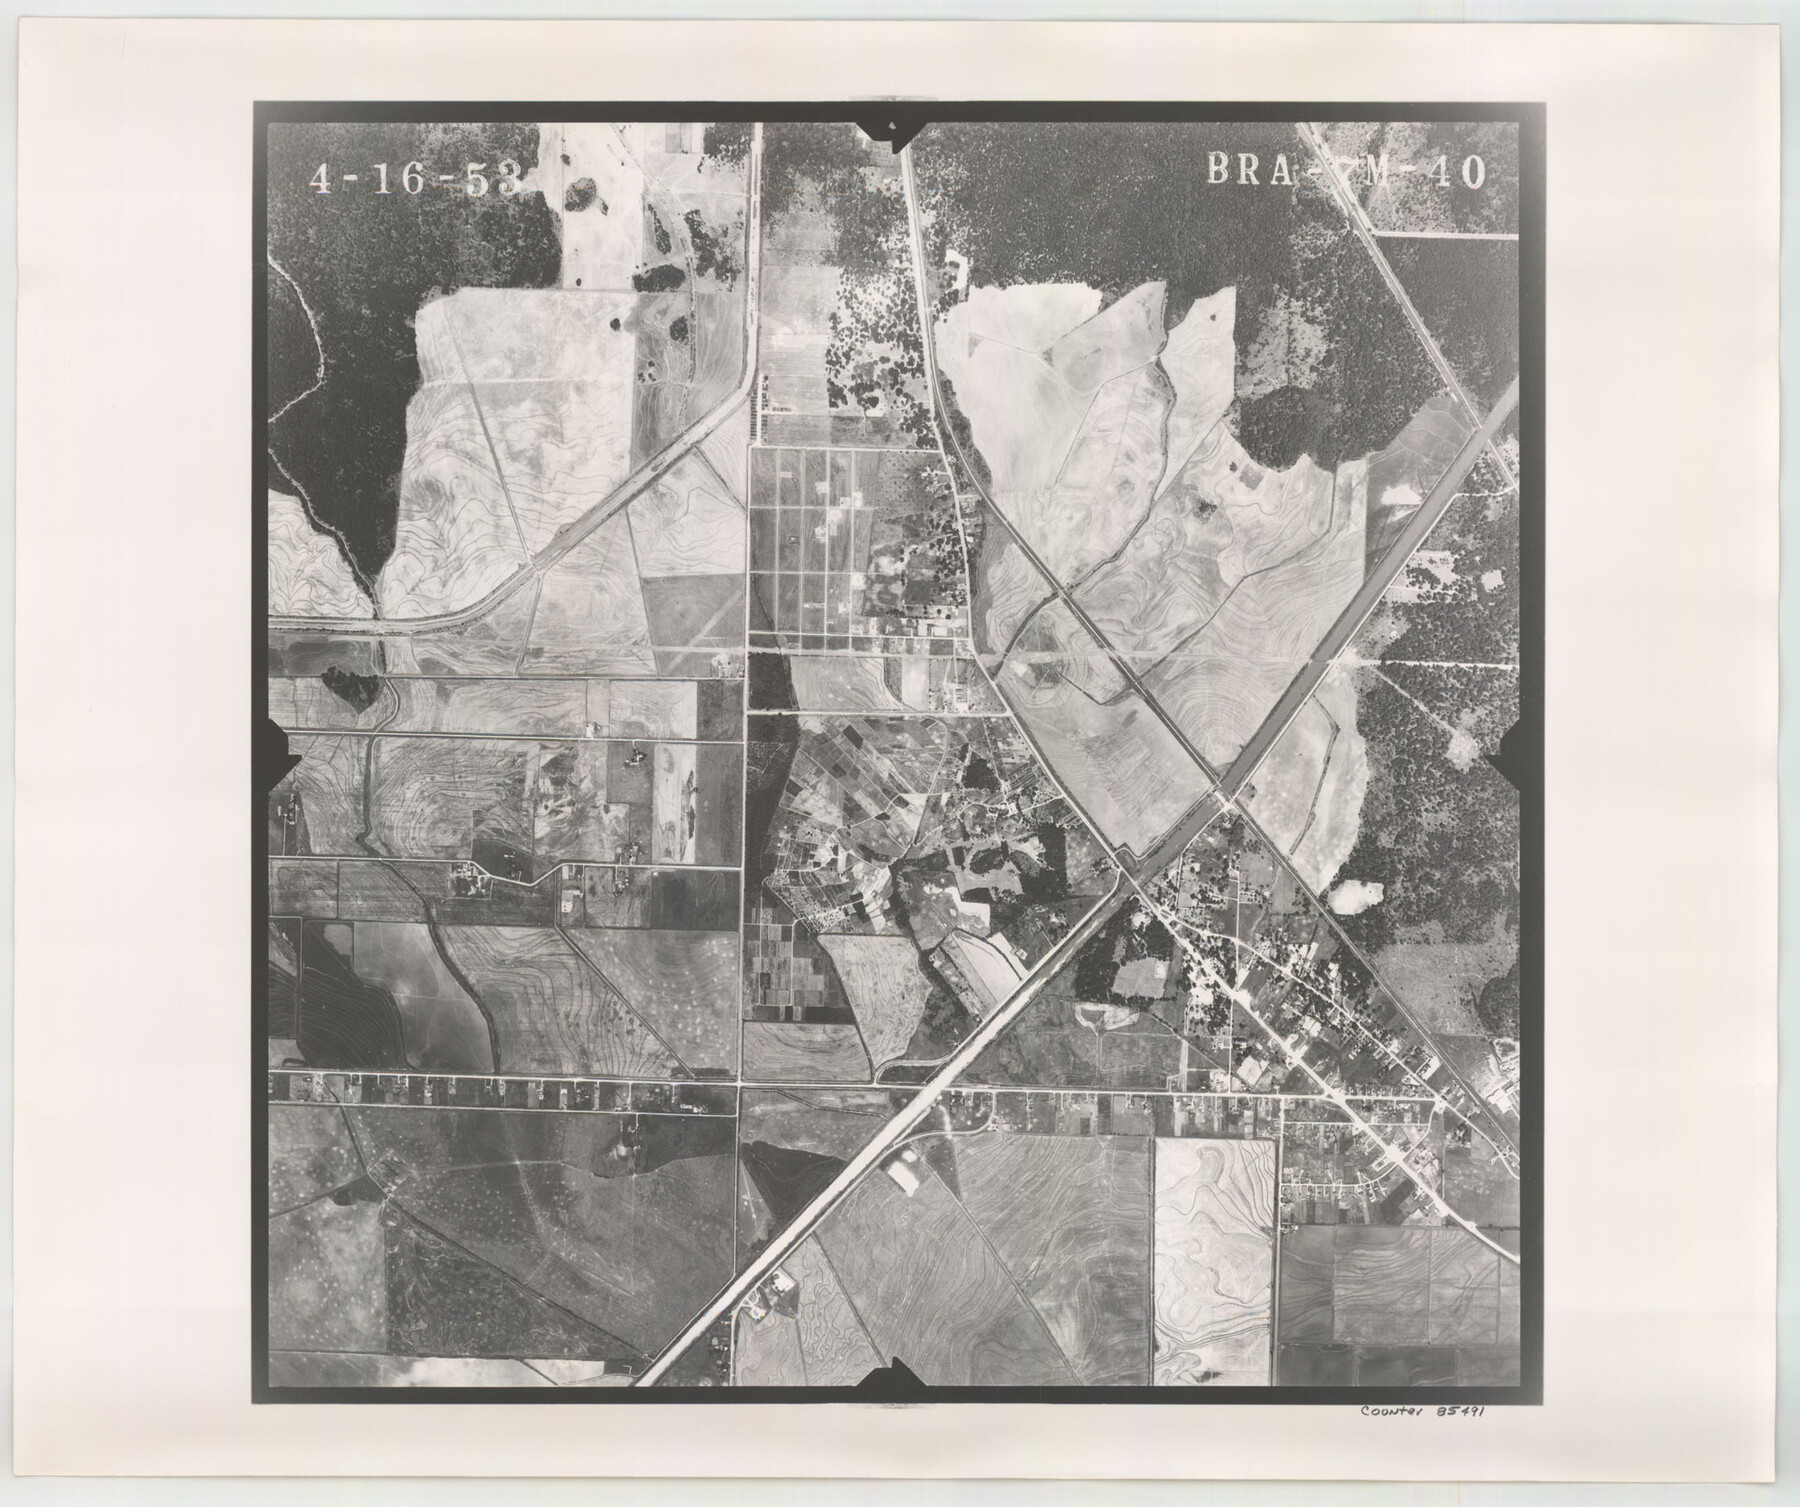 85491, Flight Mission No. BRA-7M, Frame 40, Jefferson County, General Map Collection